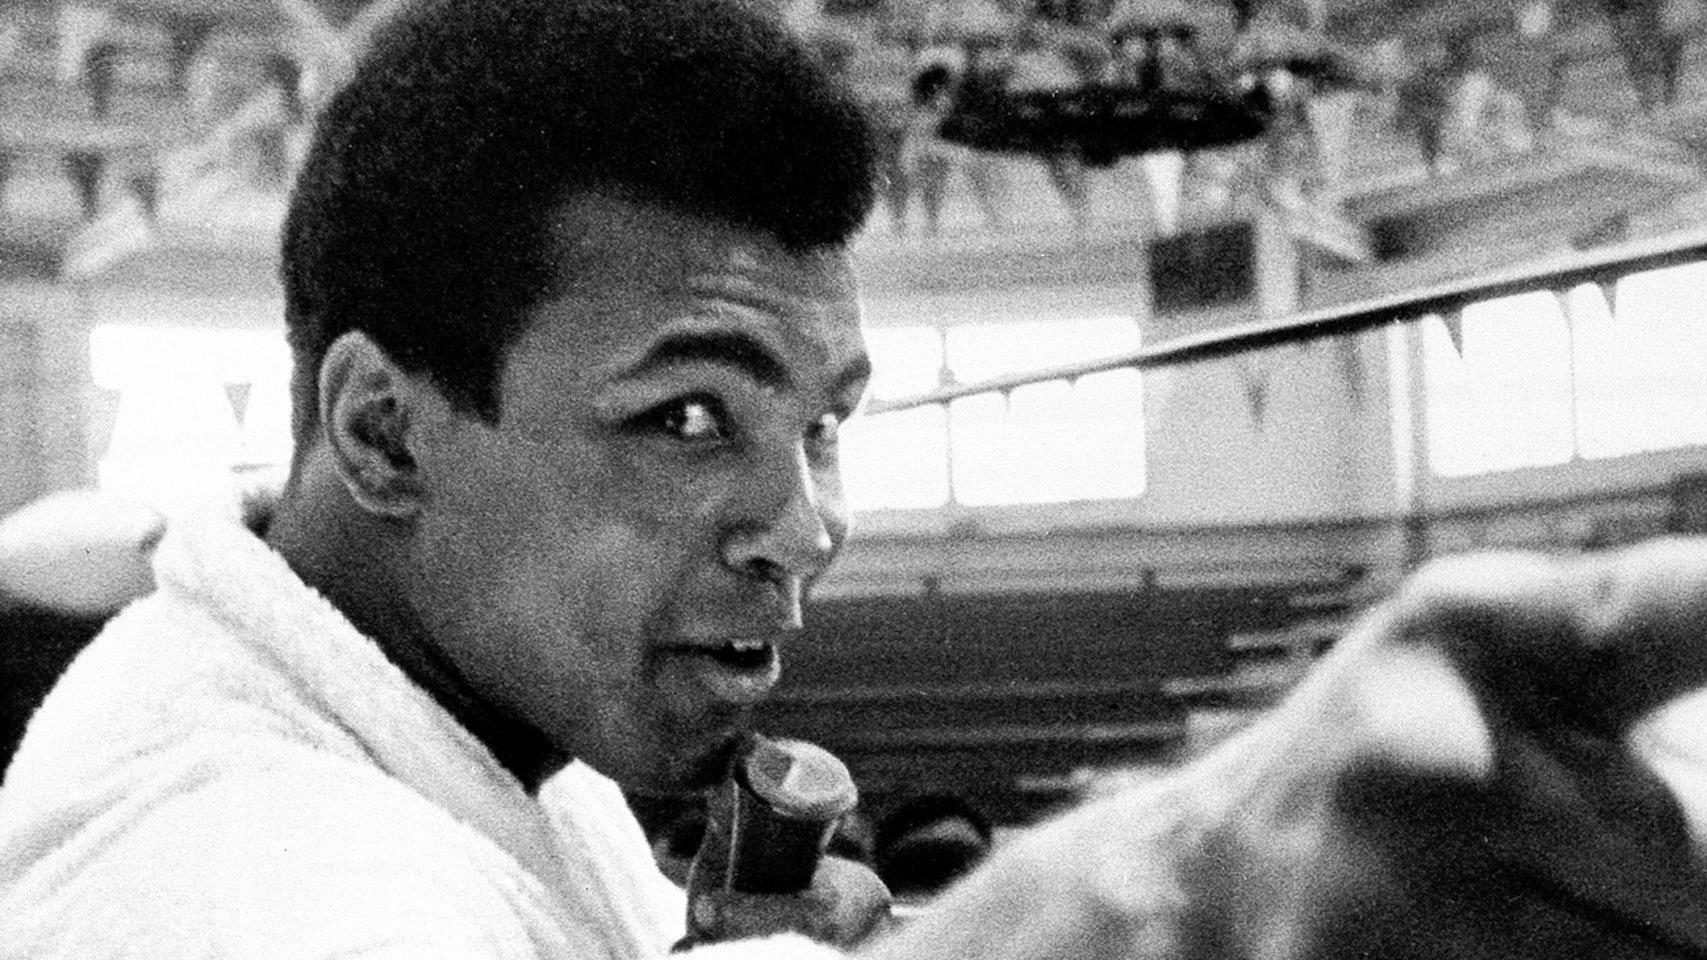 Ali remembered: Author and friend shares stories